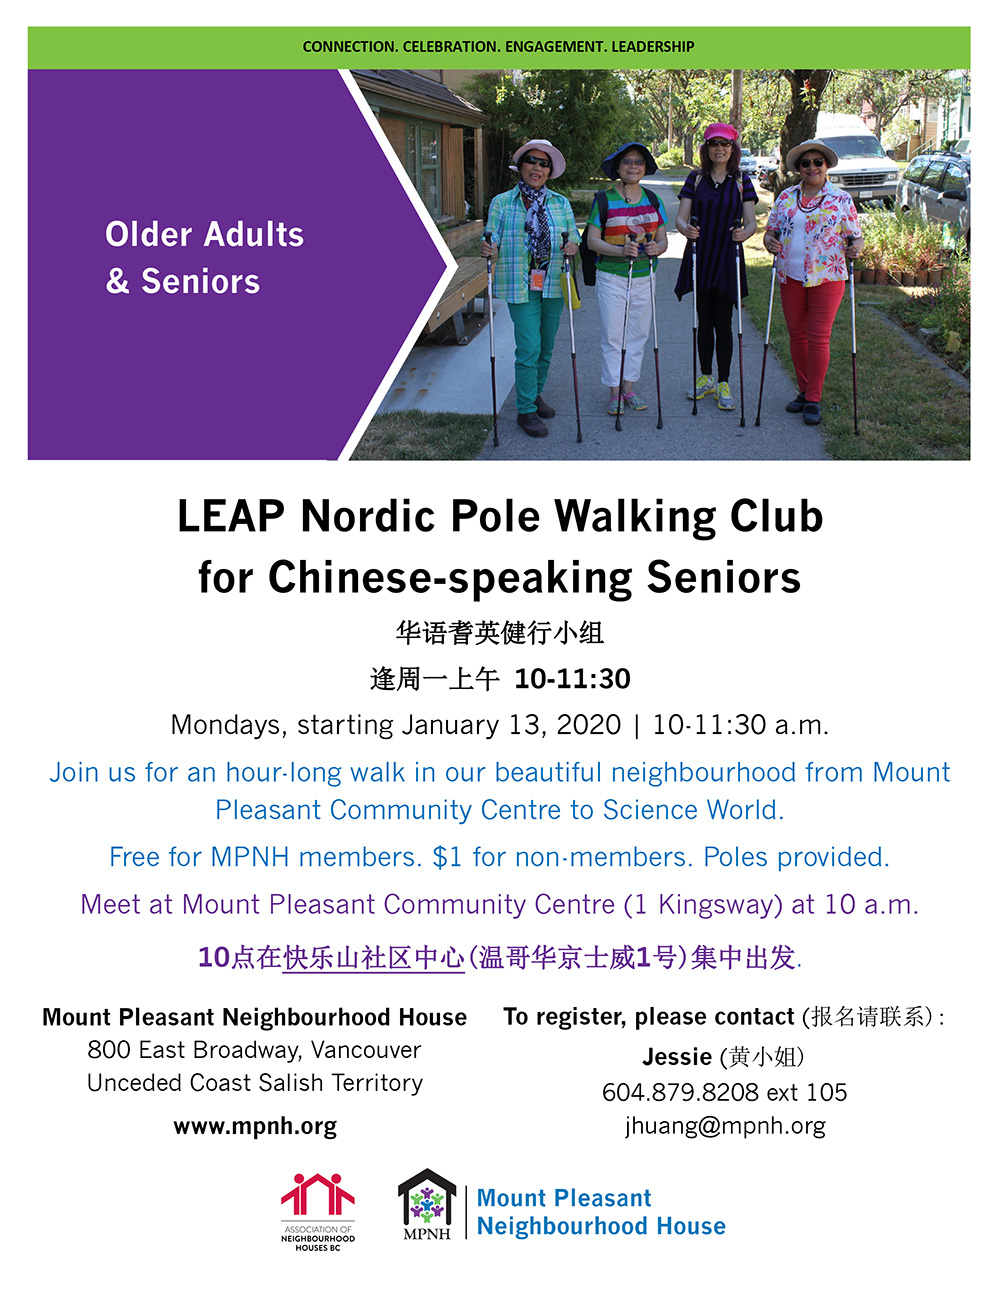 Poster for the LEAP Nordic Pole Walking Club showing Chinese-speaking seniors walking